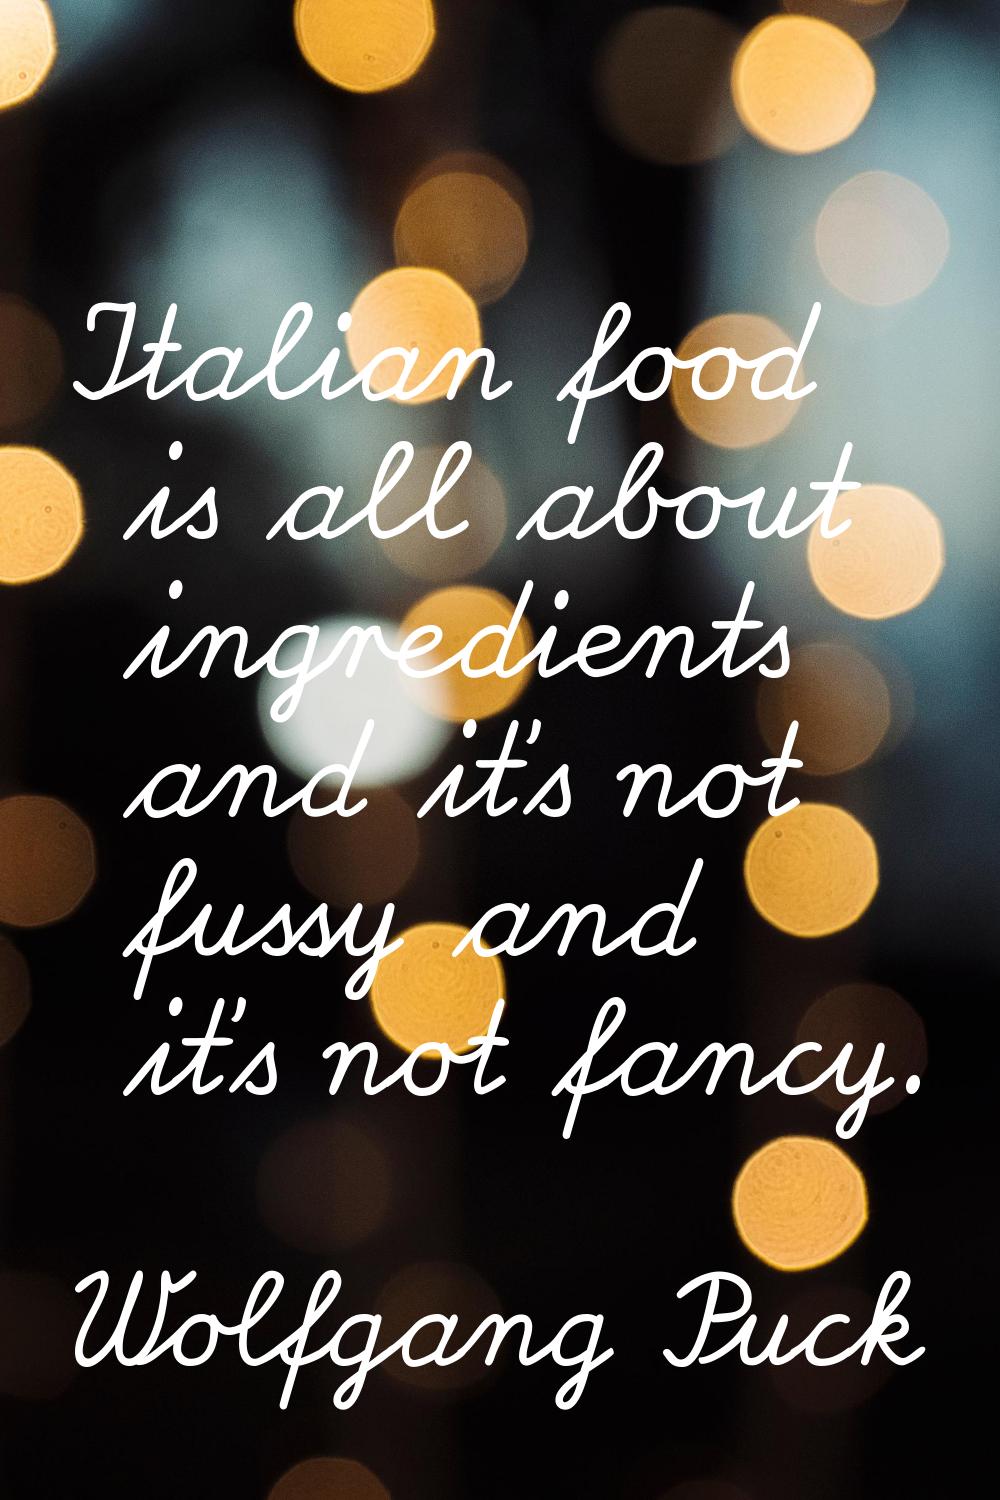 Italian food is all about ingredients and it's not fussy and it's not fancy.